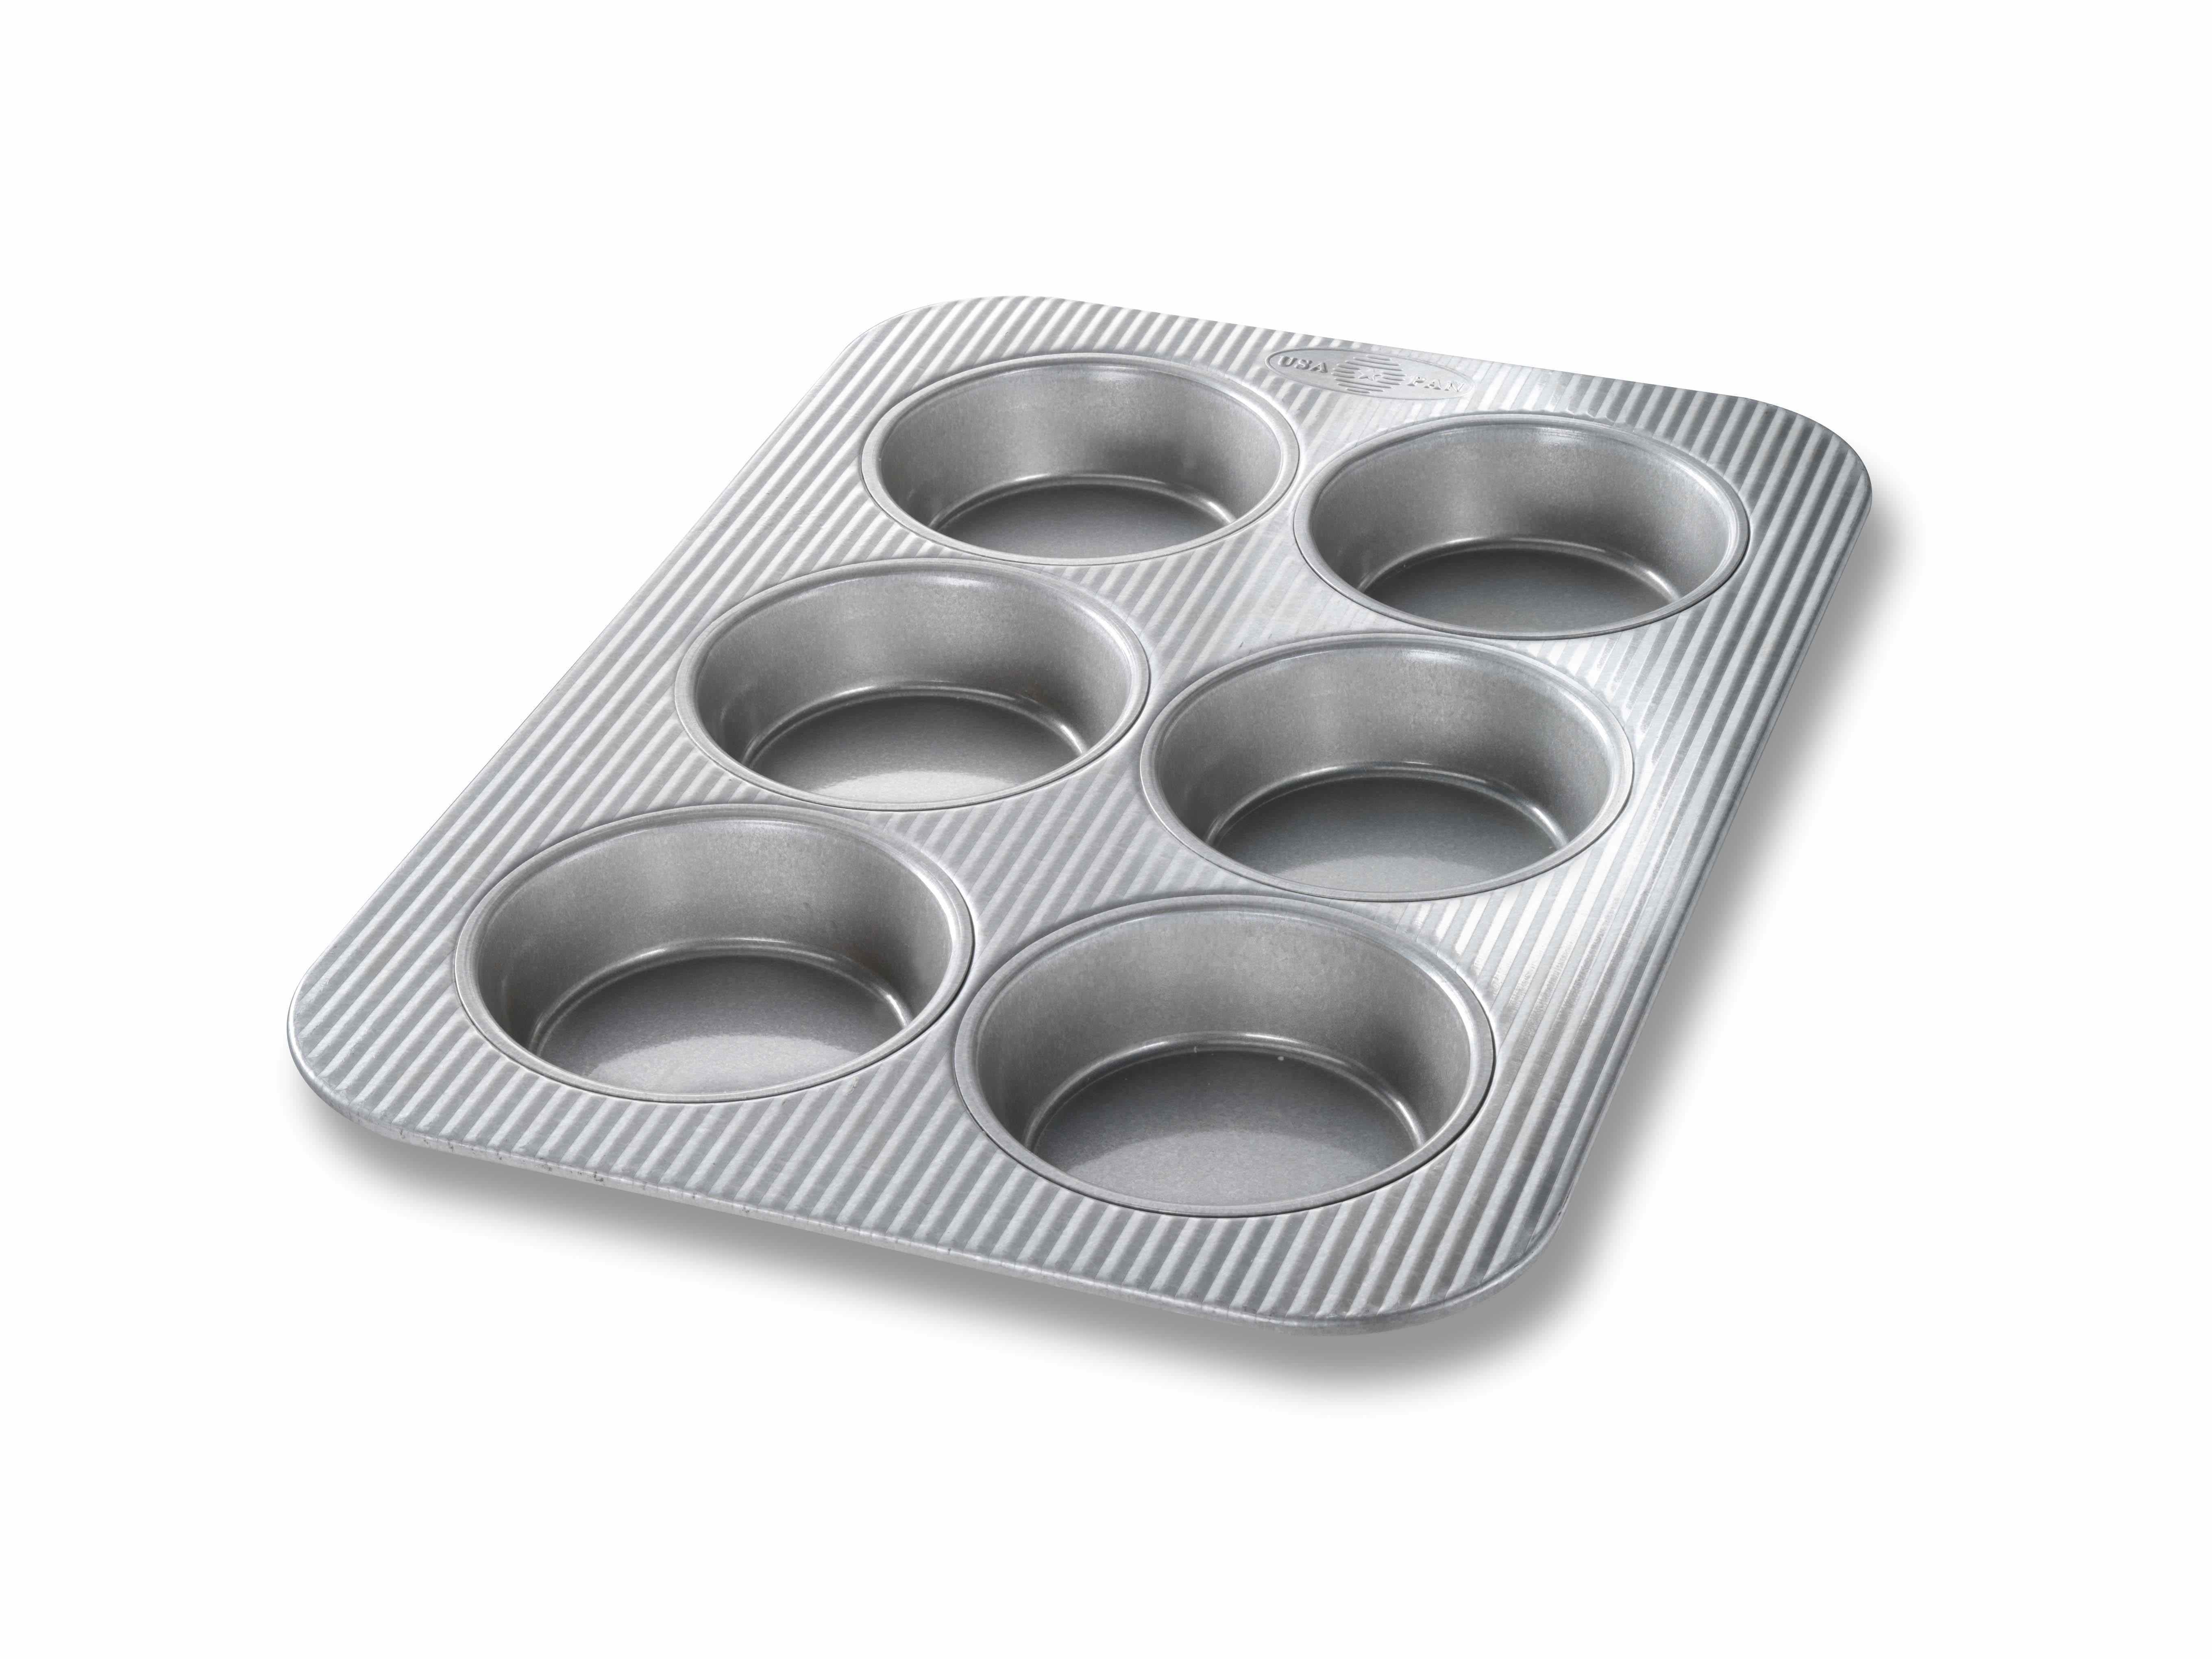 Honey-Can-Do Toaster Oven Baking Pan, 9-Inches x 6-Inches x 0.75-Inches